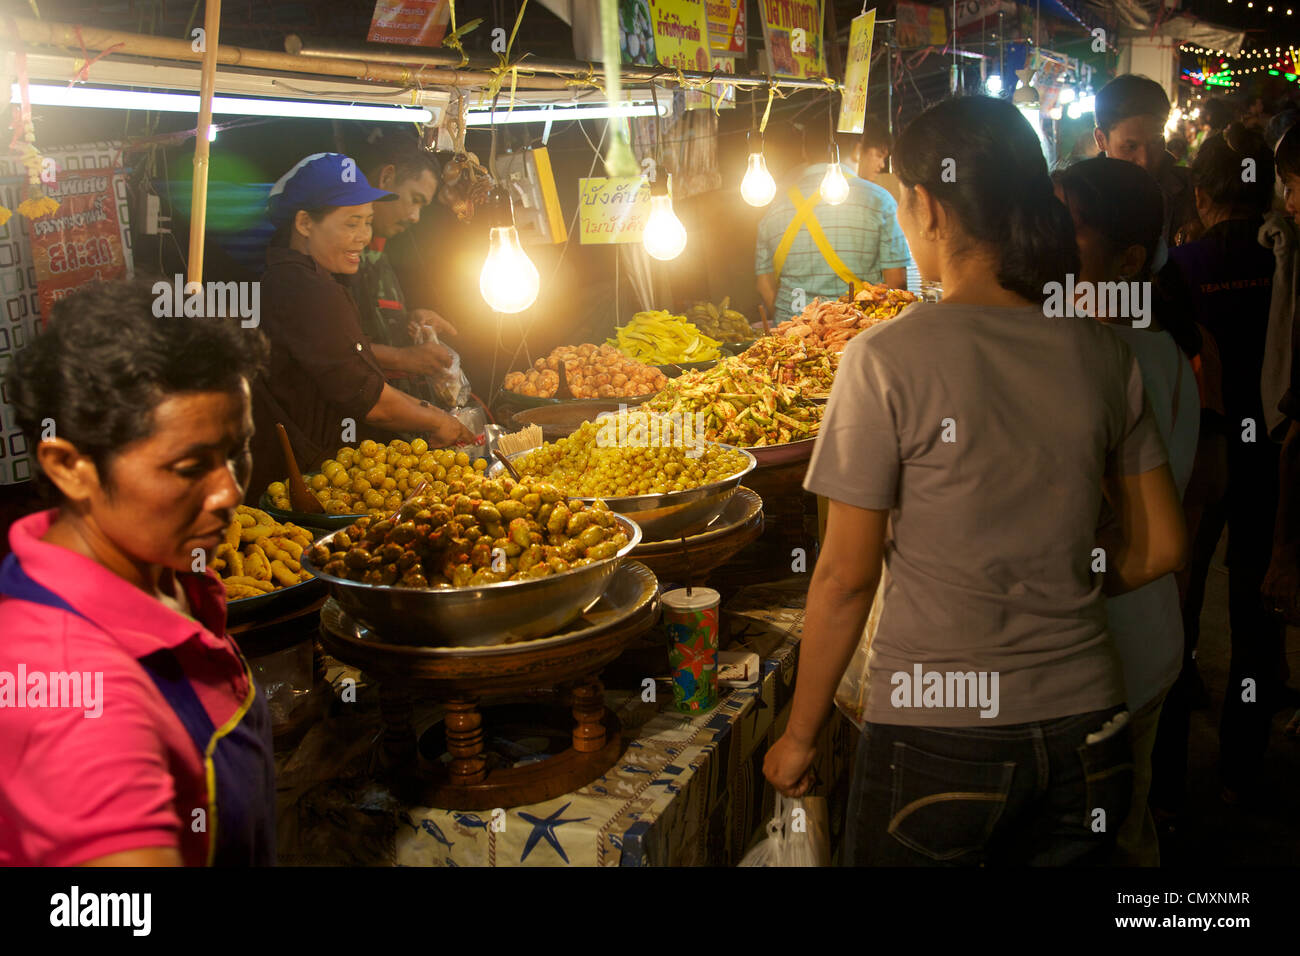 A stall selling food at a fair in Phuket Thailand Stock Photo